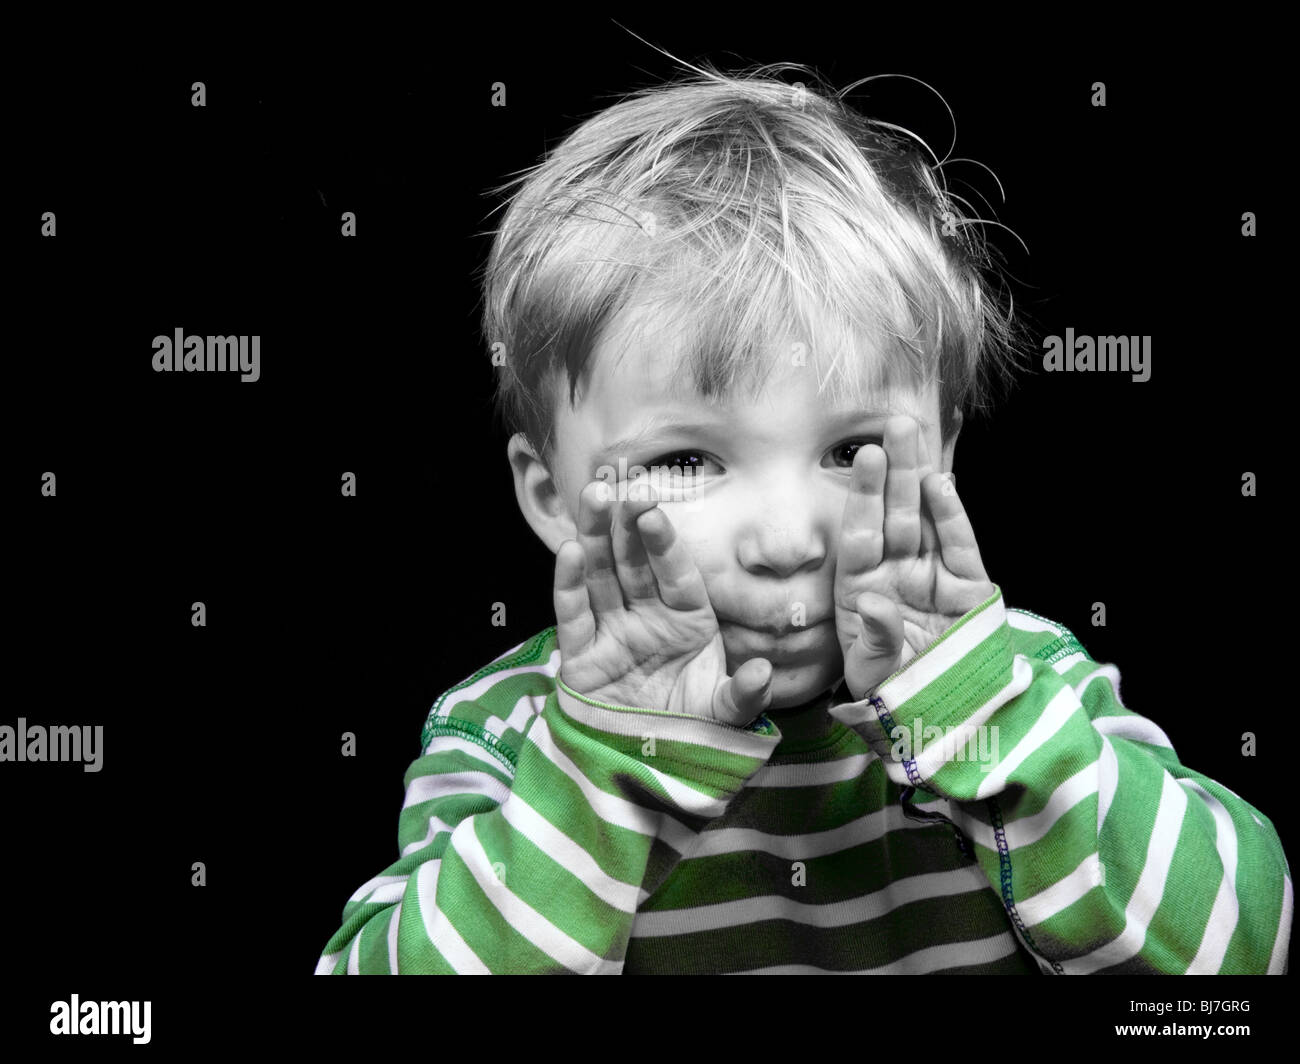 Little boy showing hands on black background, monochrome picture with only color green Stock Photo